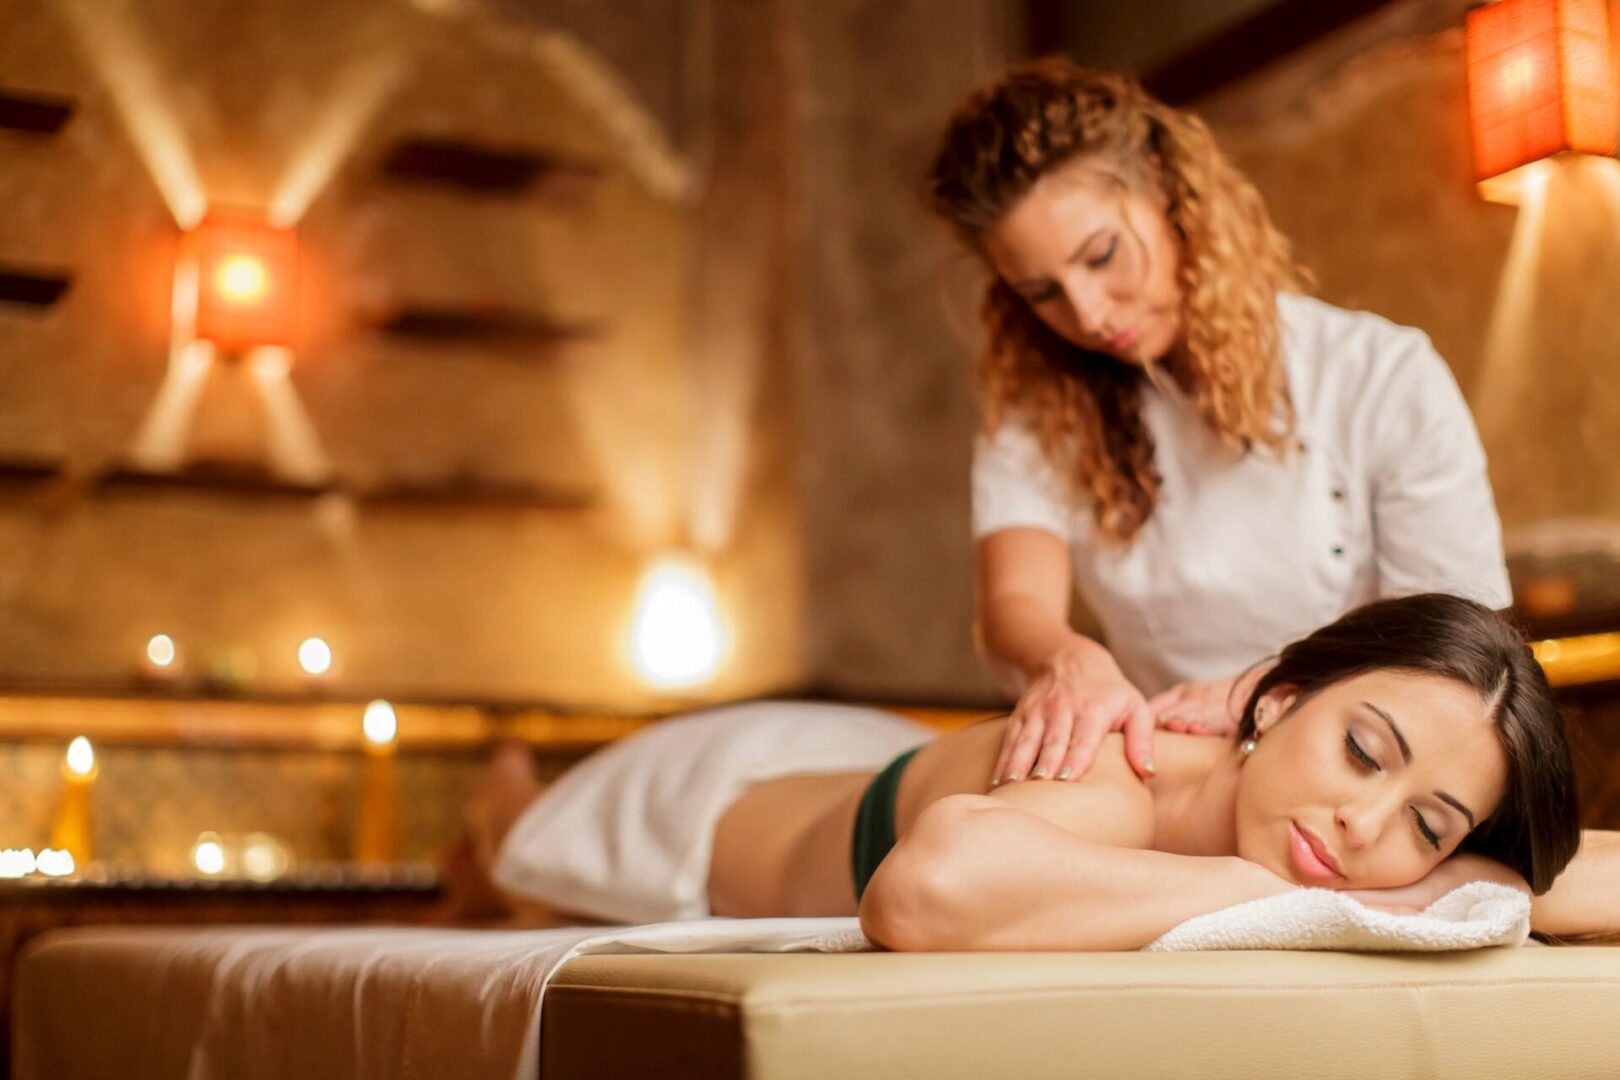 A woman is getting her back massage from a masseuse.